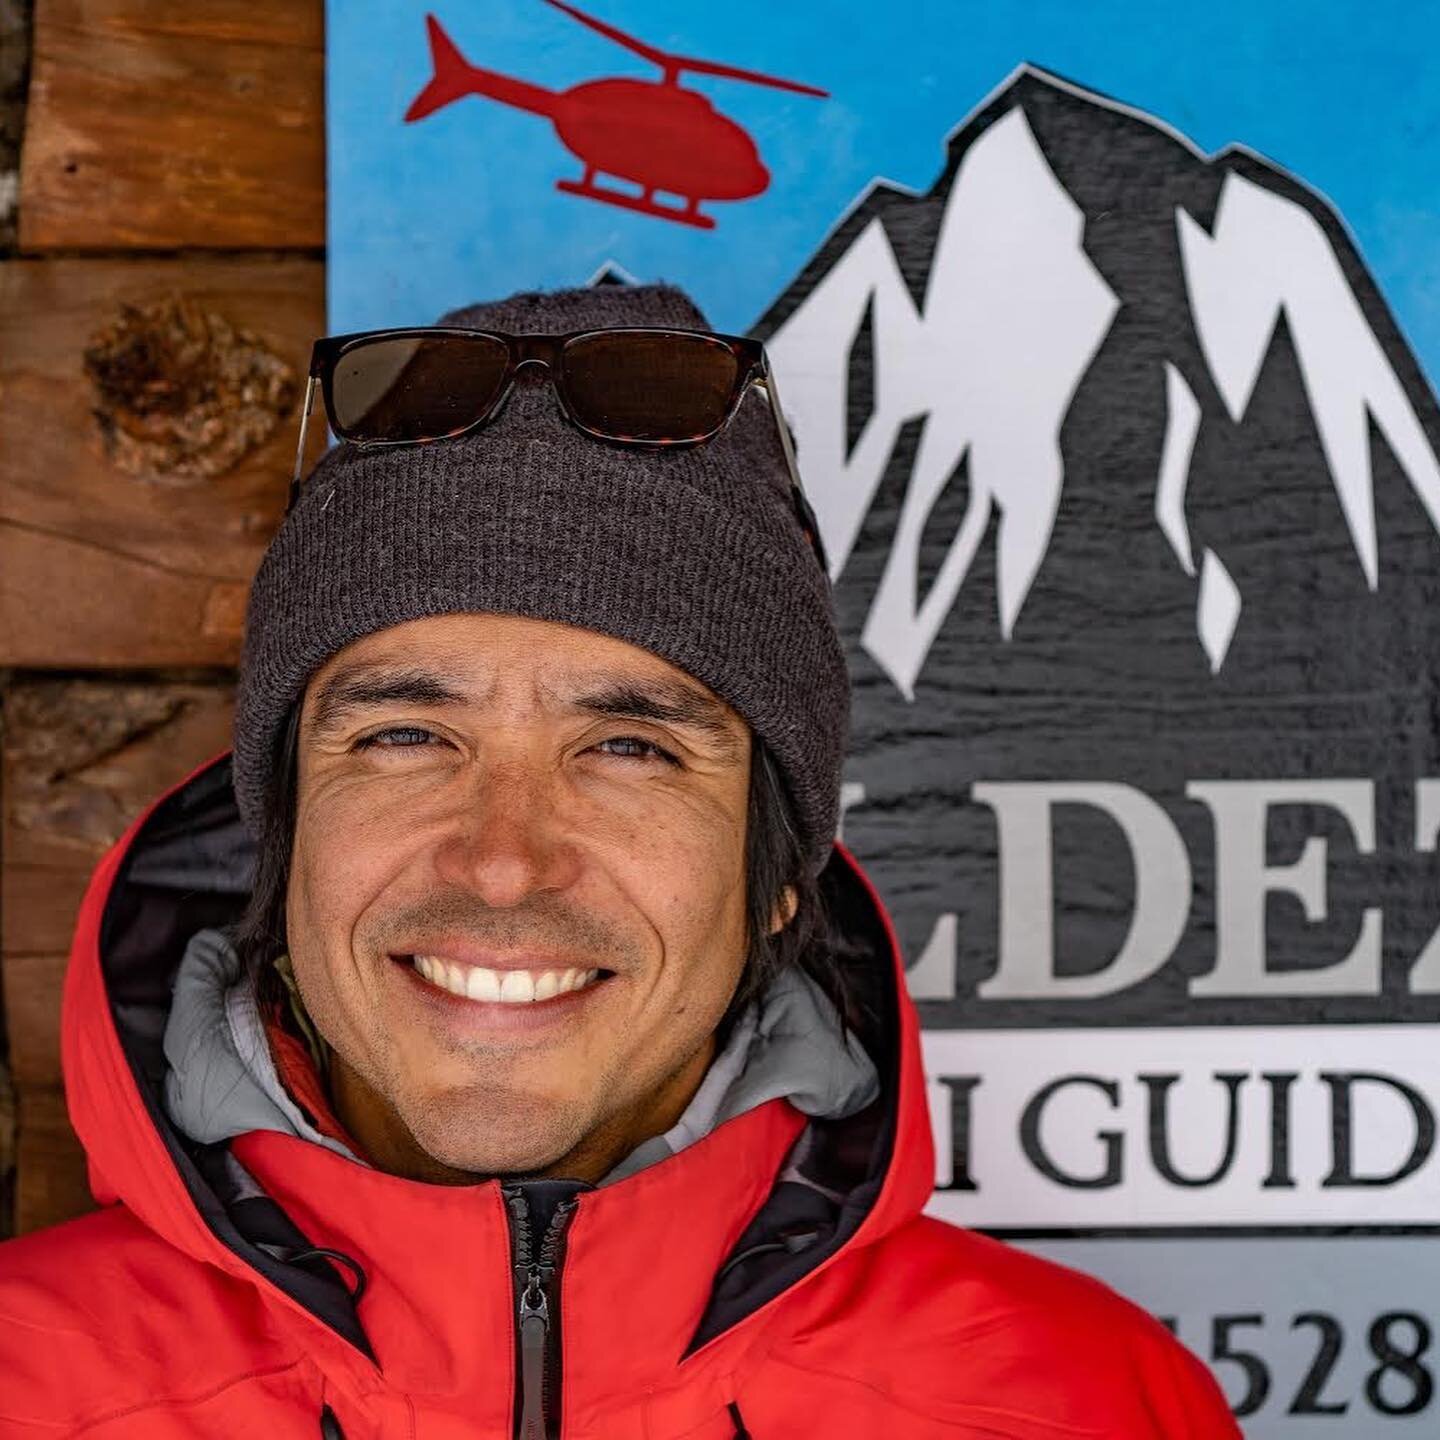 Episode 6.17 is 🆙. Sean Zimmerman-Wall sits down with @hectorsilvaperalta .  Hector is an ACMG Apprentice Ski guide based in Chile, living the endless winter between Chile, Canada and Alaska.

H&eacute;ctor grew up in the mountains , close to portil